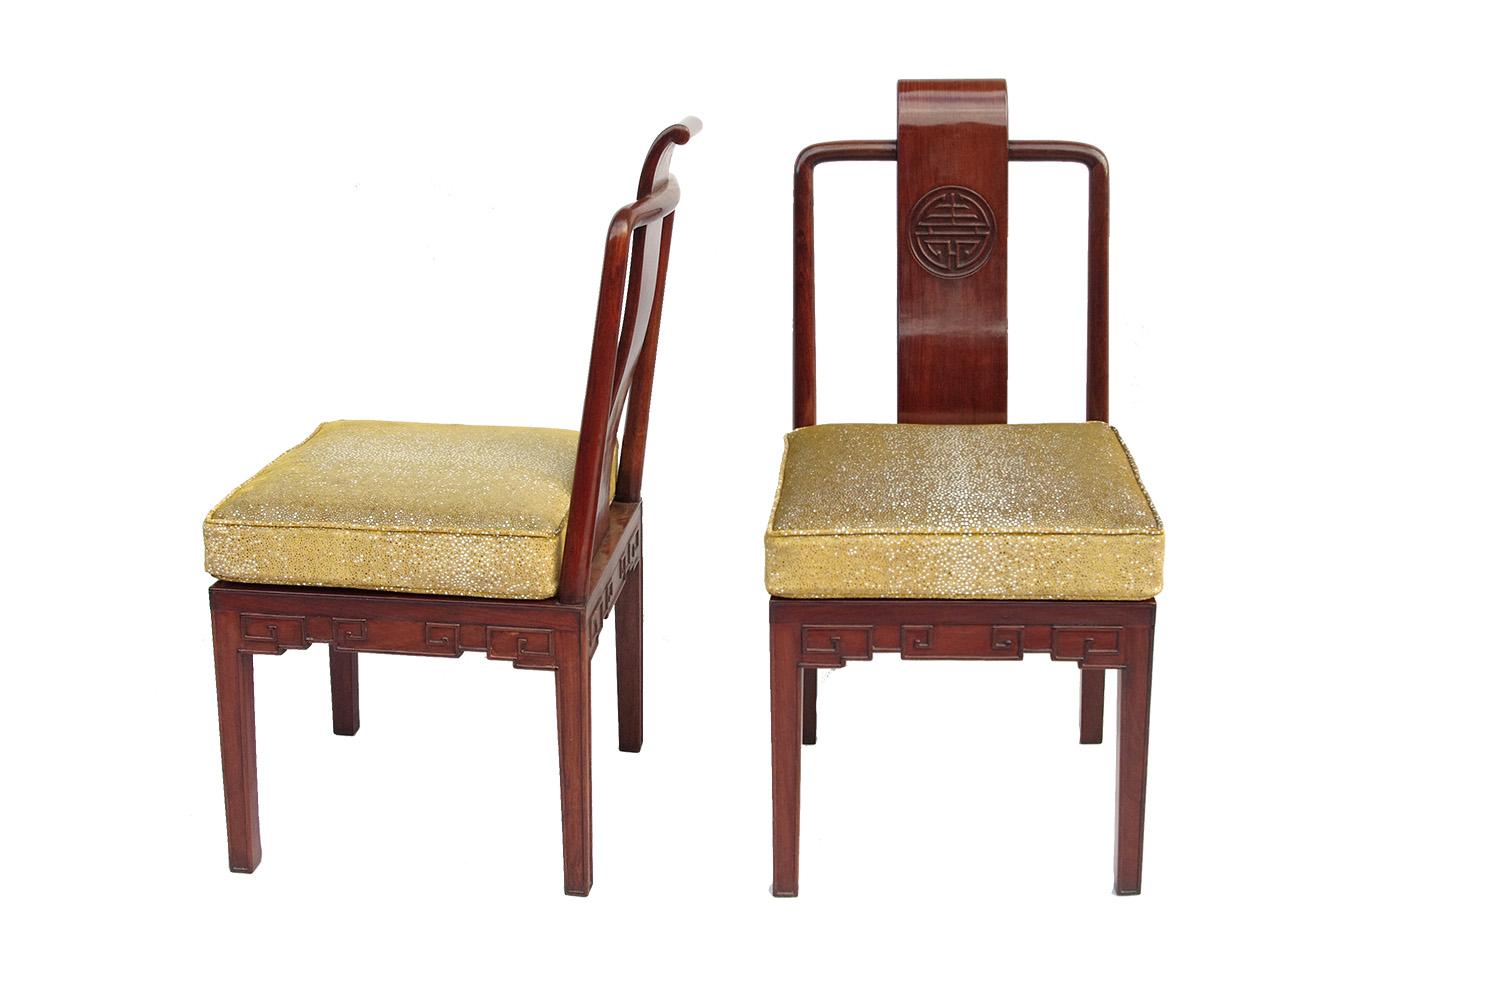 Pair of Chinese Ming dynasty style chairs standing on four square section legs. Square with rounded corners openwork backseat with circular-section rails adorned with an S-shaped back splat that is reversed on the top and exceeds a little bit above